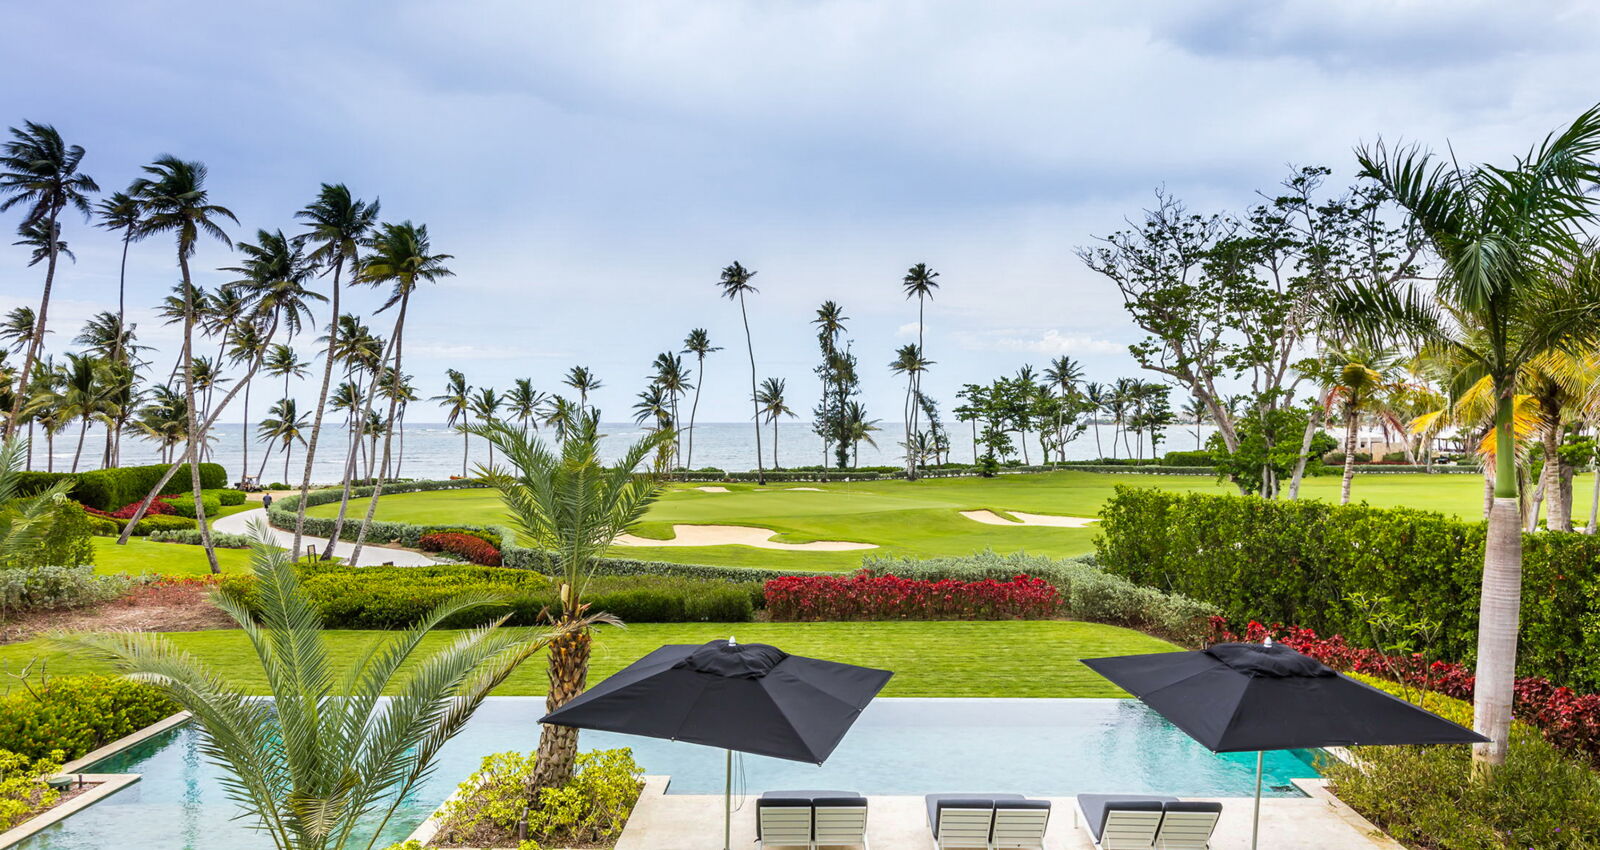 Ritz-Carlton Reserve East Beach Residence estate pool overlooking oceanfront and golf course